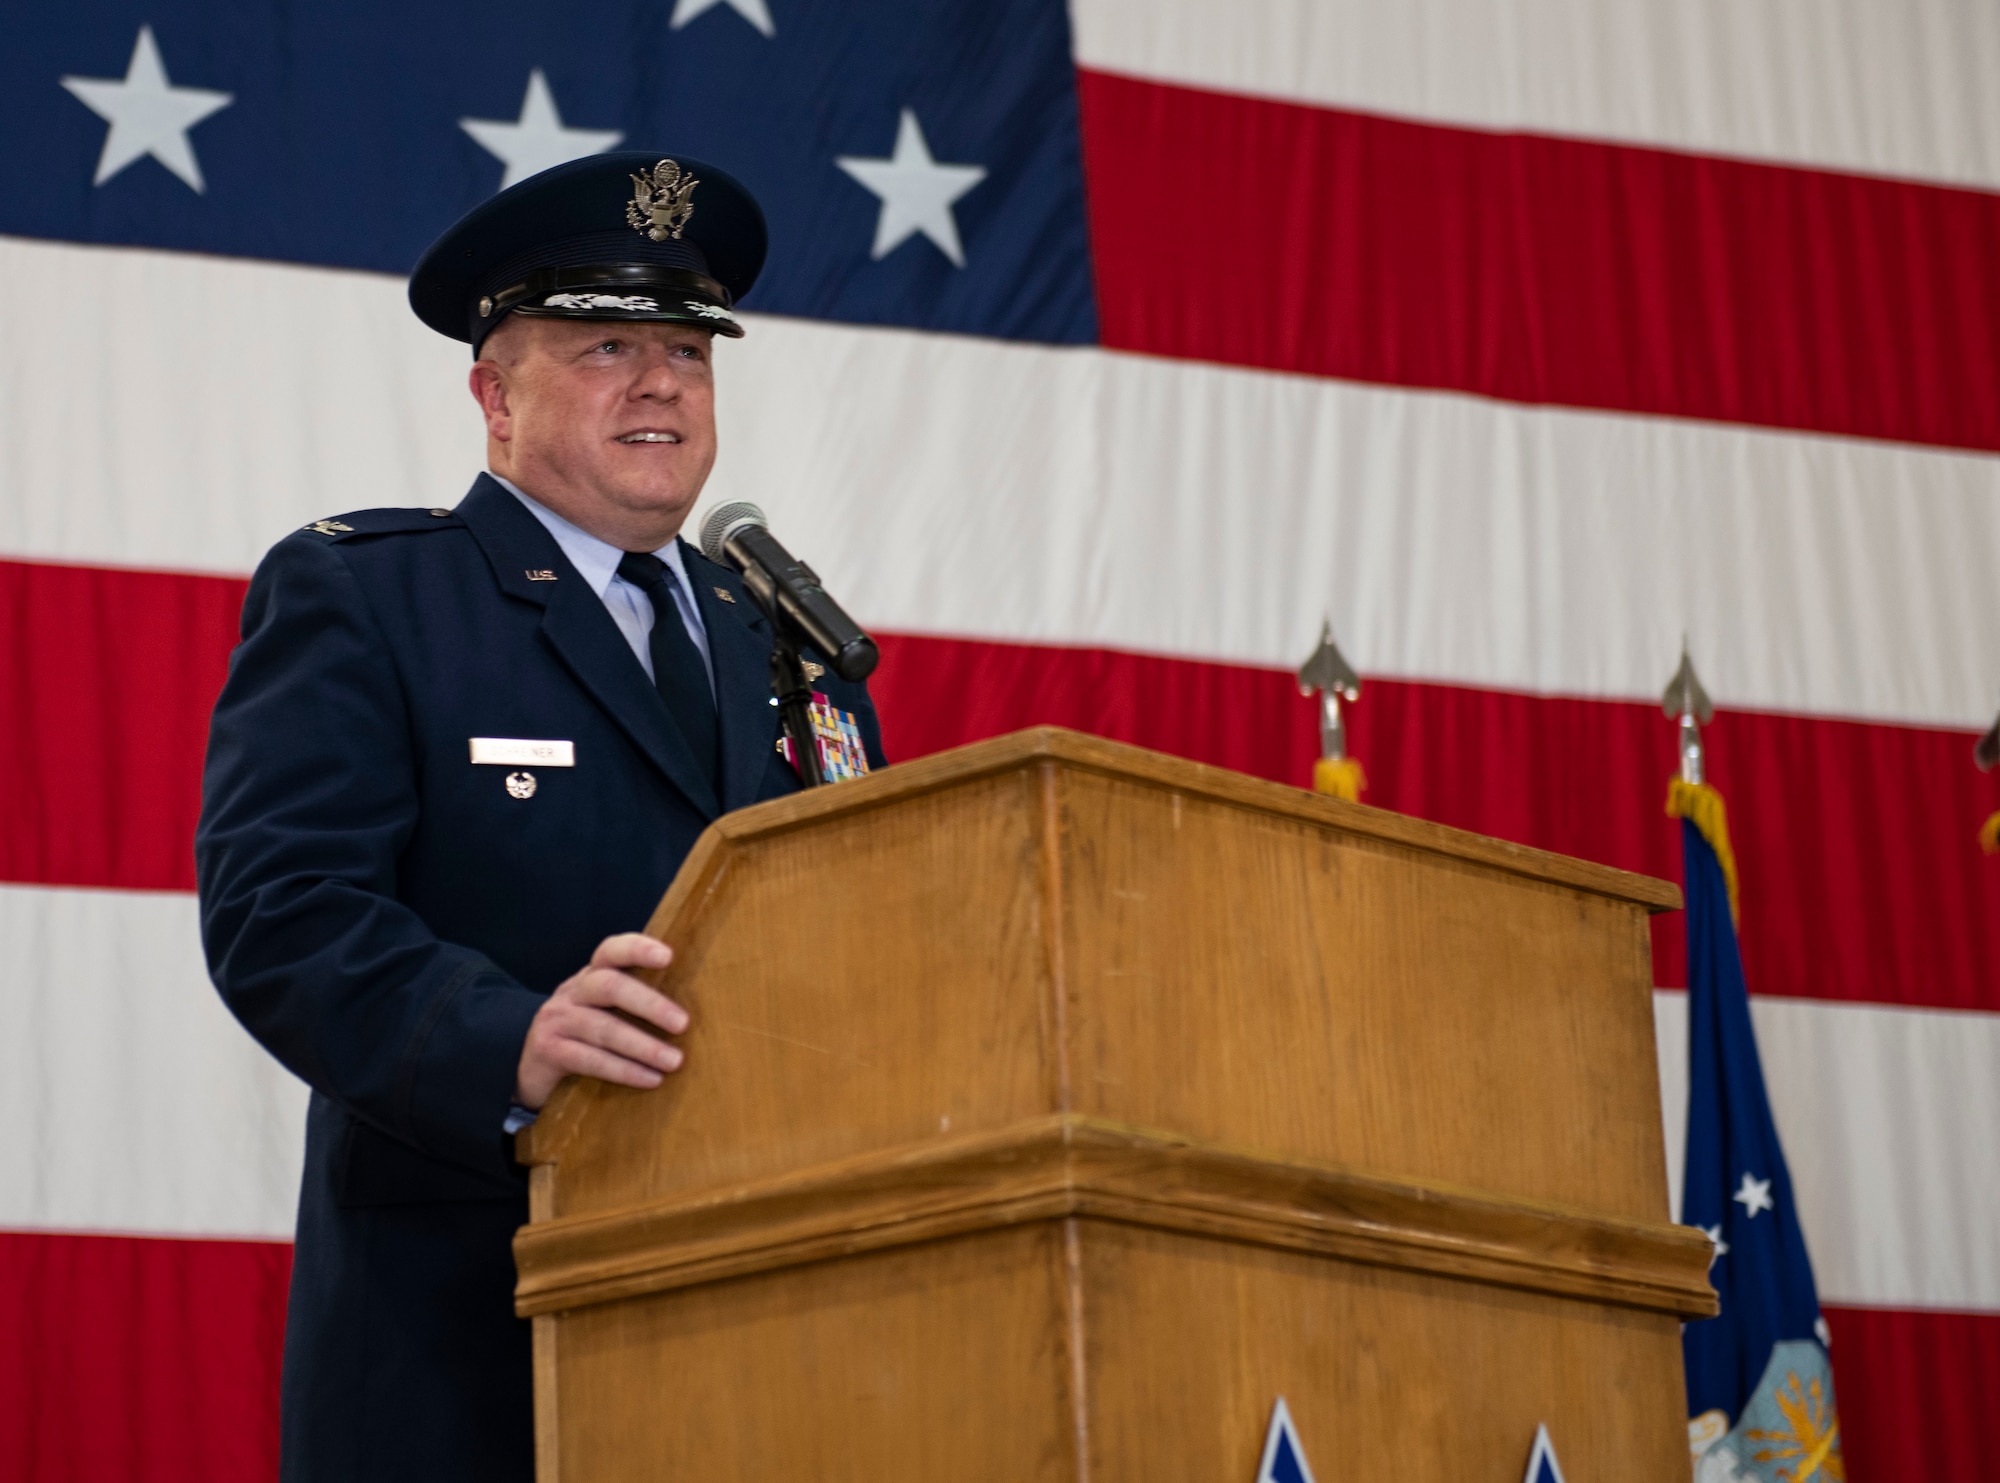 U.S. Air Force Col. Jeffrey Schreiner, former 509th Bomb Wing commander, thanks his family and members of the 509th BW for their support and service during the 509th BW change of command ceremony, Whiteman Air Force Base, Missouri, June 16, 2021. After two years in command and leading Team Whiteman through the global COVID-19 pandemic, Schreiner is headed for a new leadership position with the United States Strategic Command at Offutt Air Force Base, Nebraska. (U.S. Air Force photo by Airman First Class Victoria Hommel)